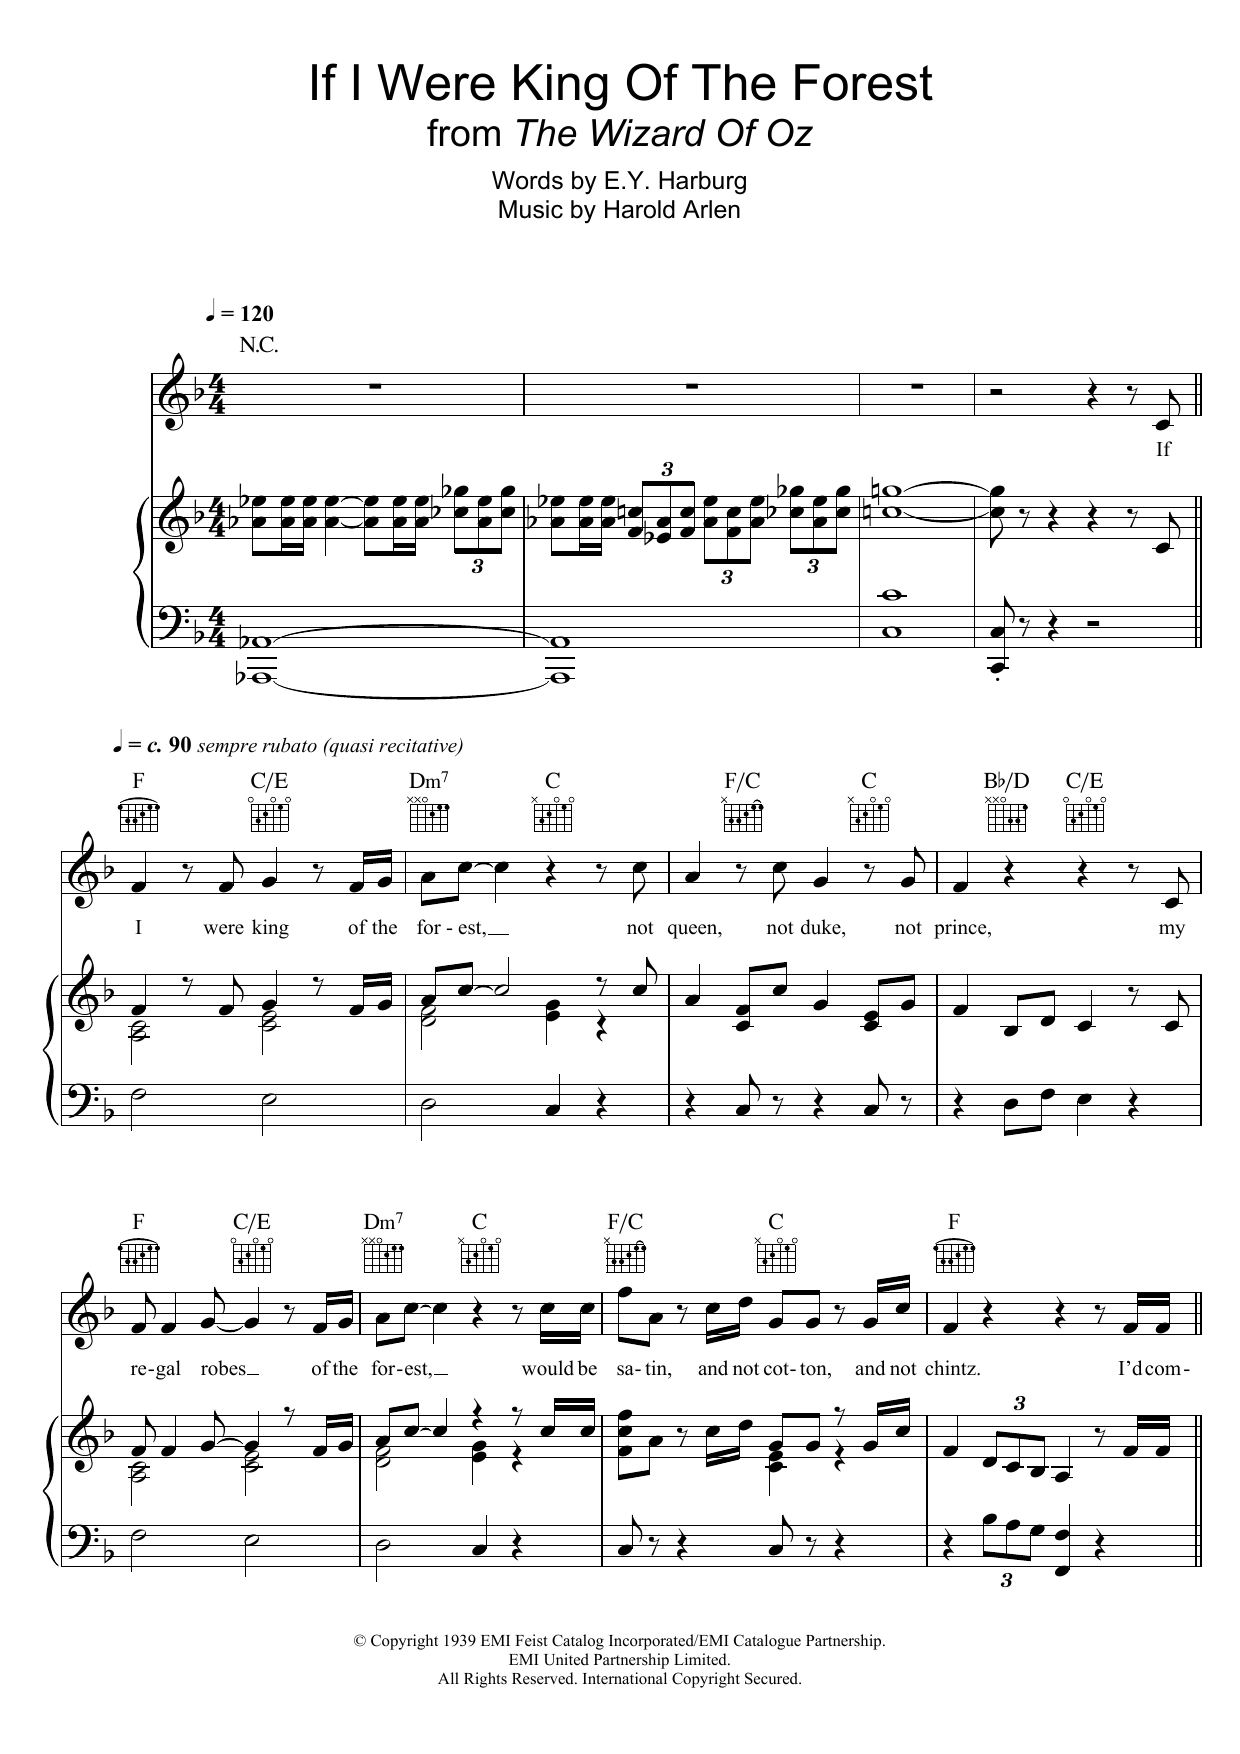 If I Were The King Of The Forest (from 'The Wizard Of Oz') sheet music